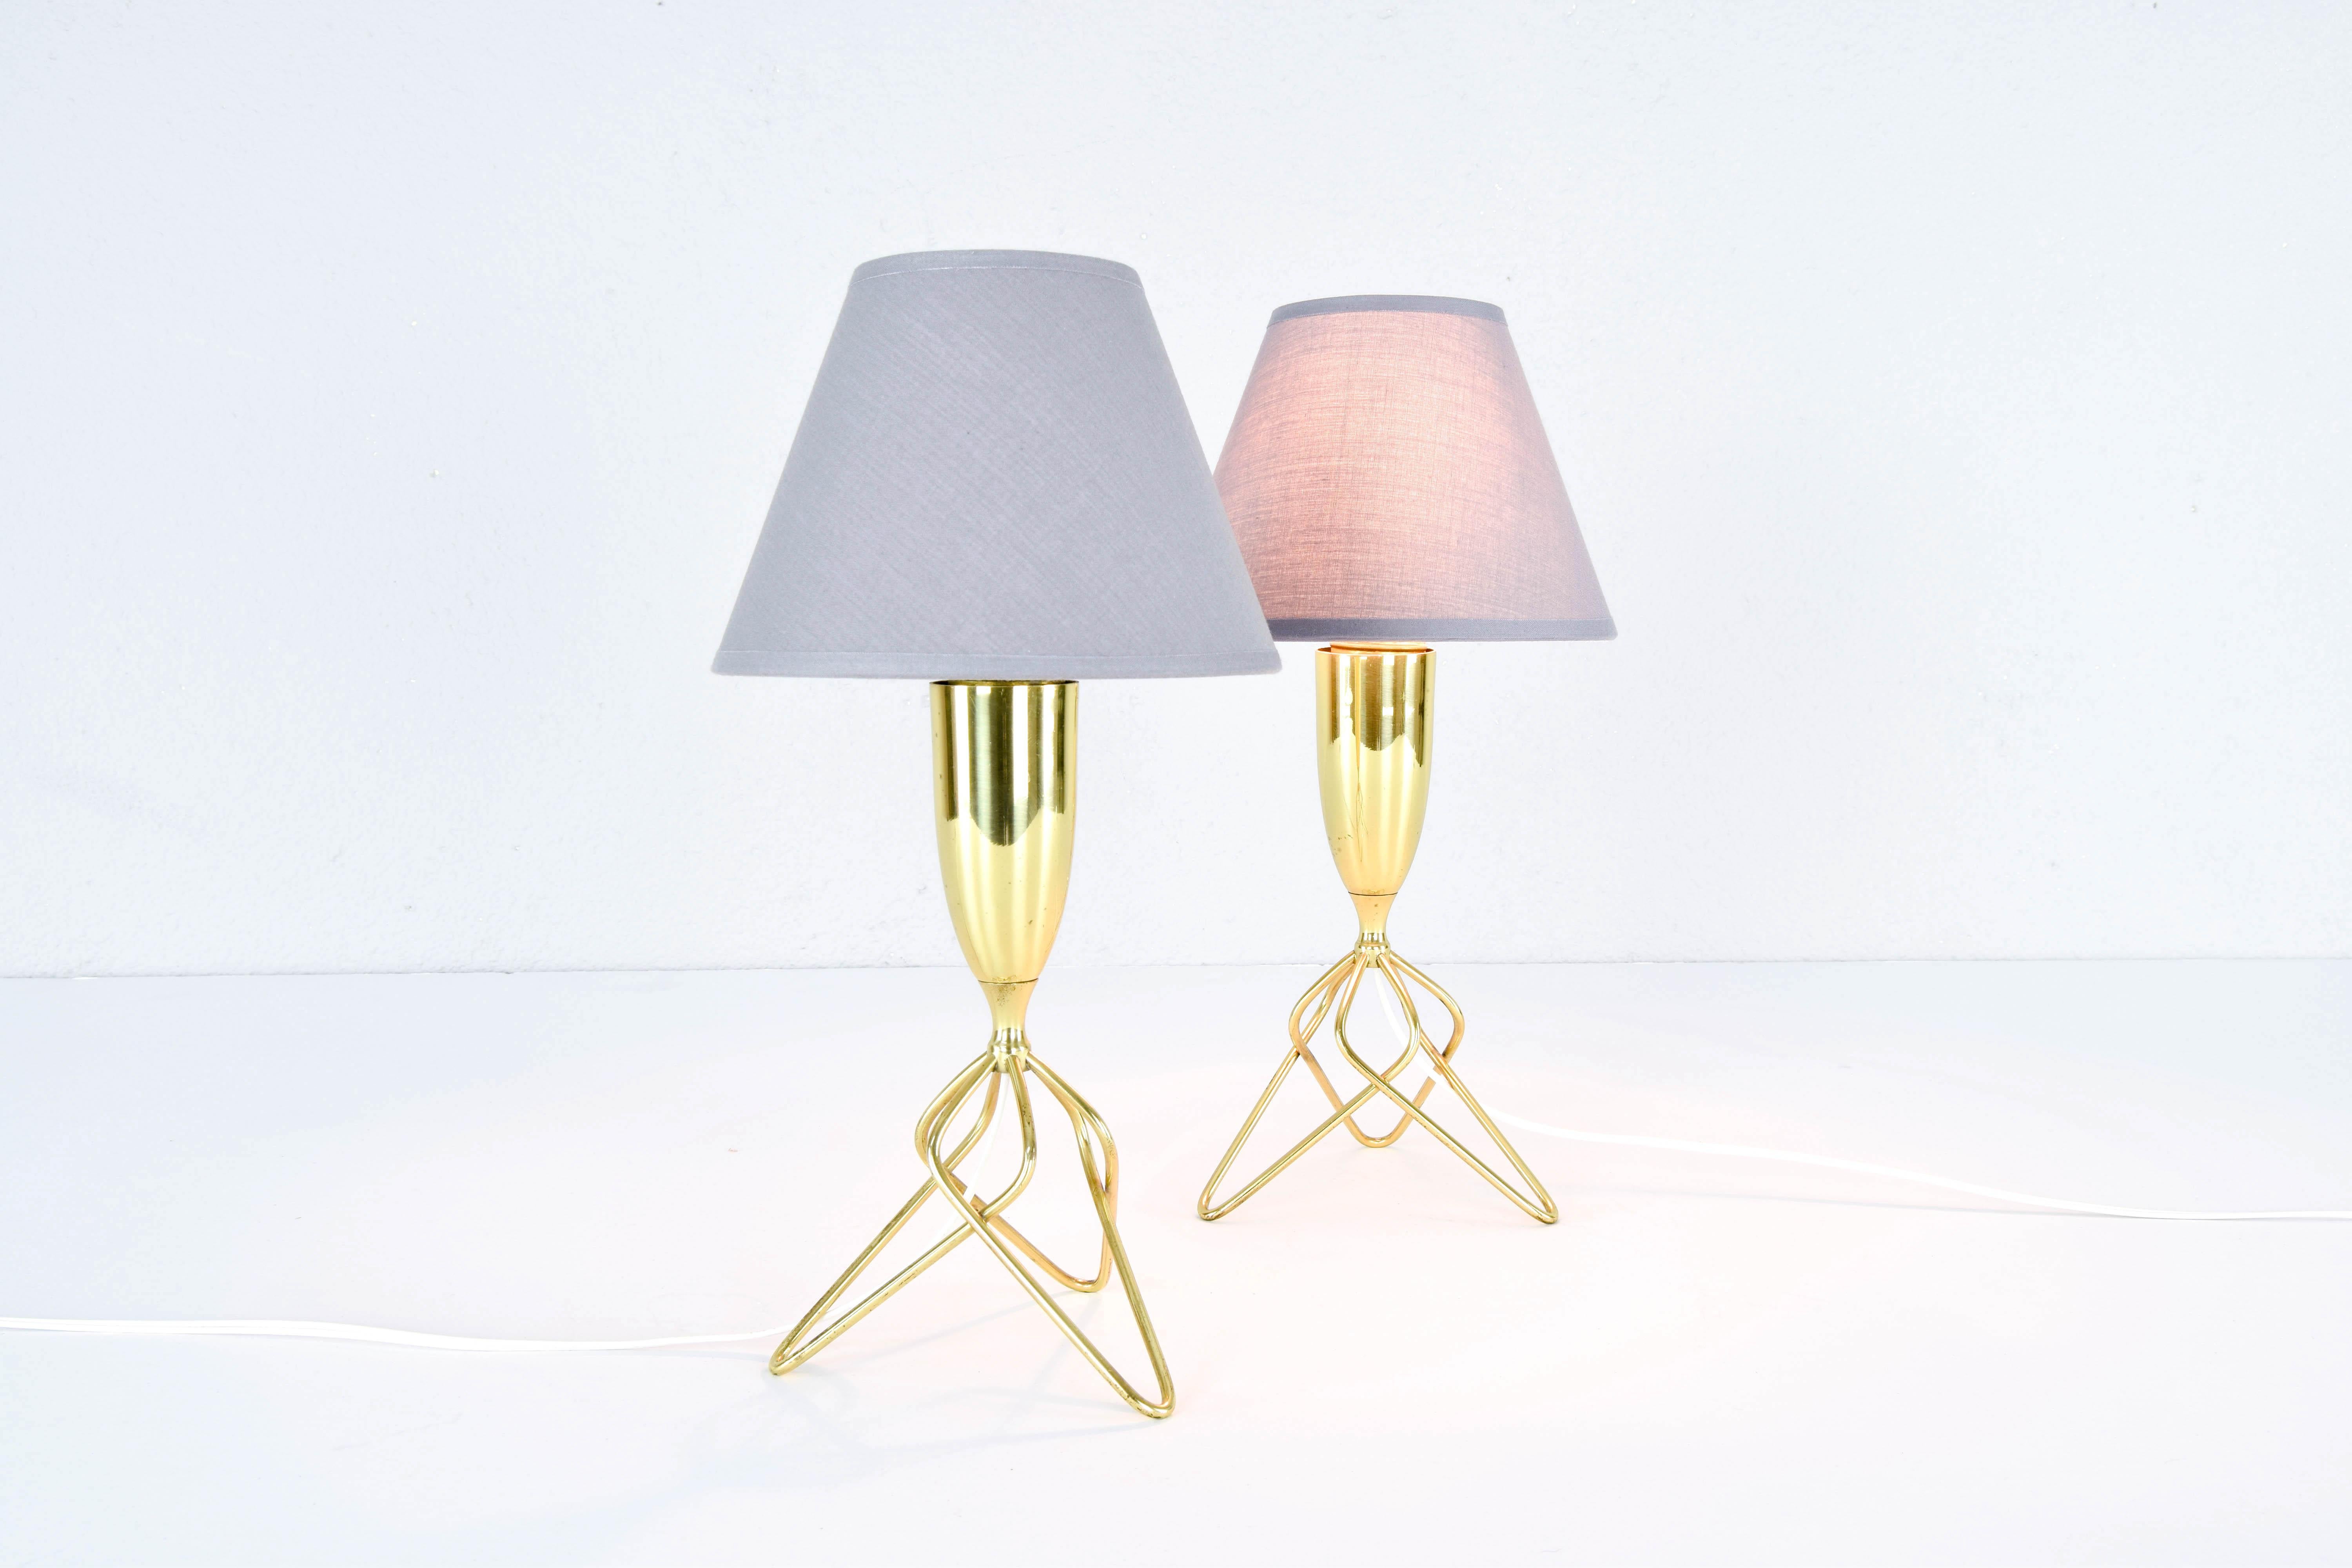 Pair of Scandinavian Brass Tripod Table Lamps with Gray Lampshades, Denmark 60s For Sale 2